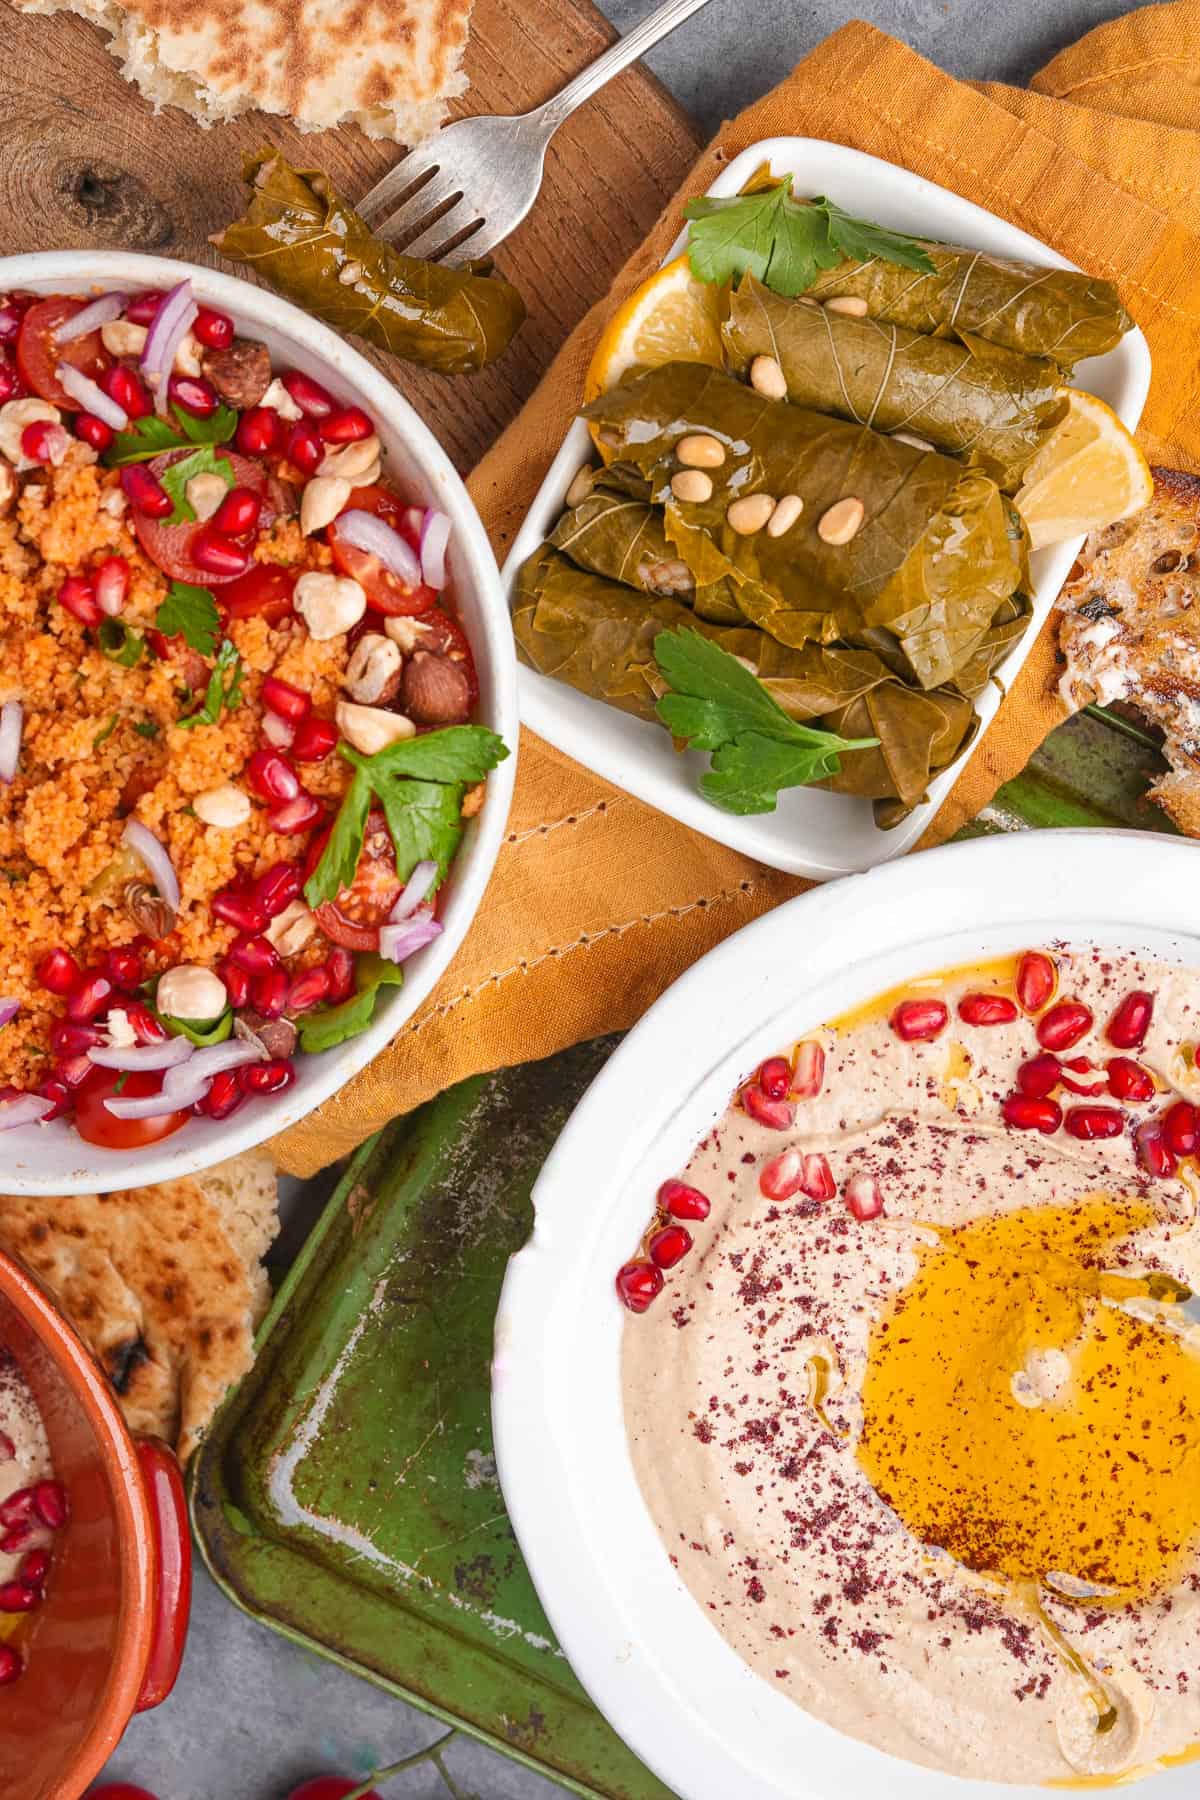 A variety of dishes with mutabal, pita bread, stuffed grape leaves, and kisir.